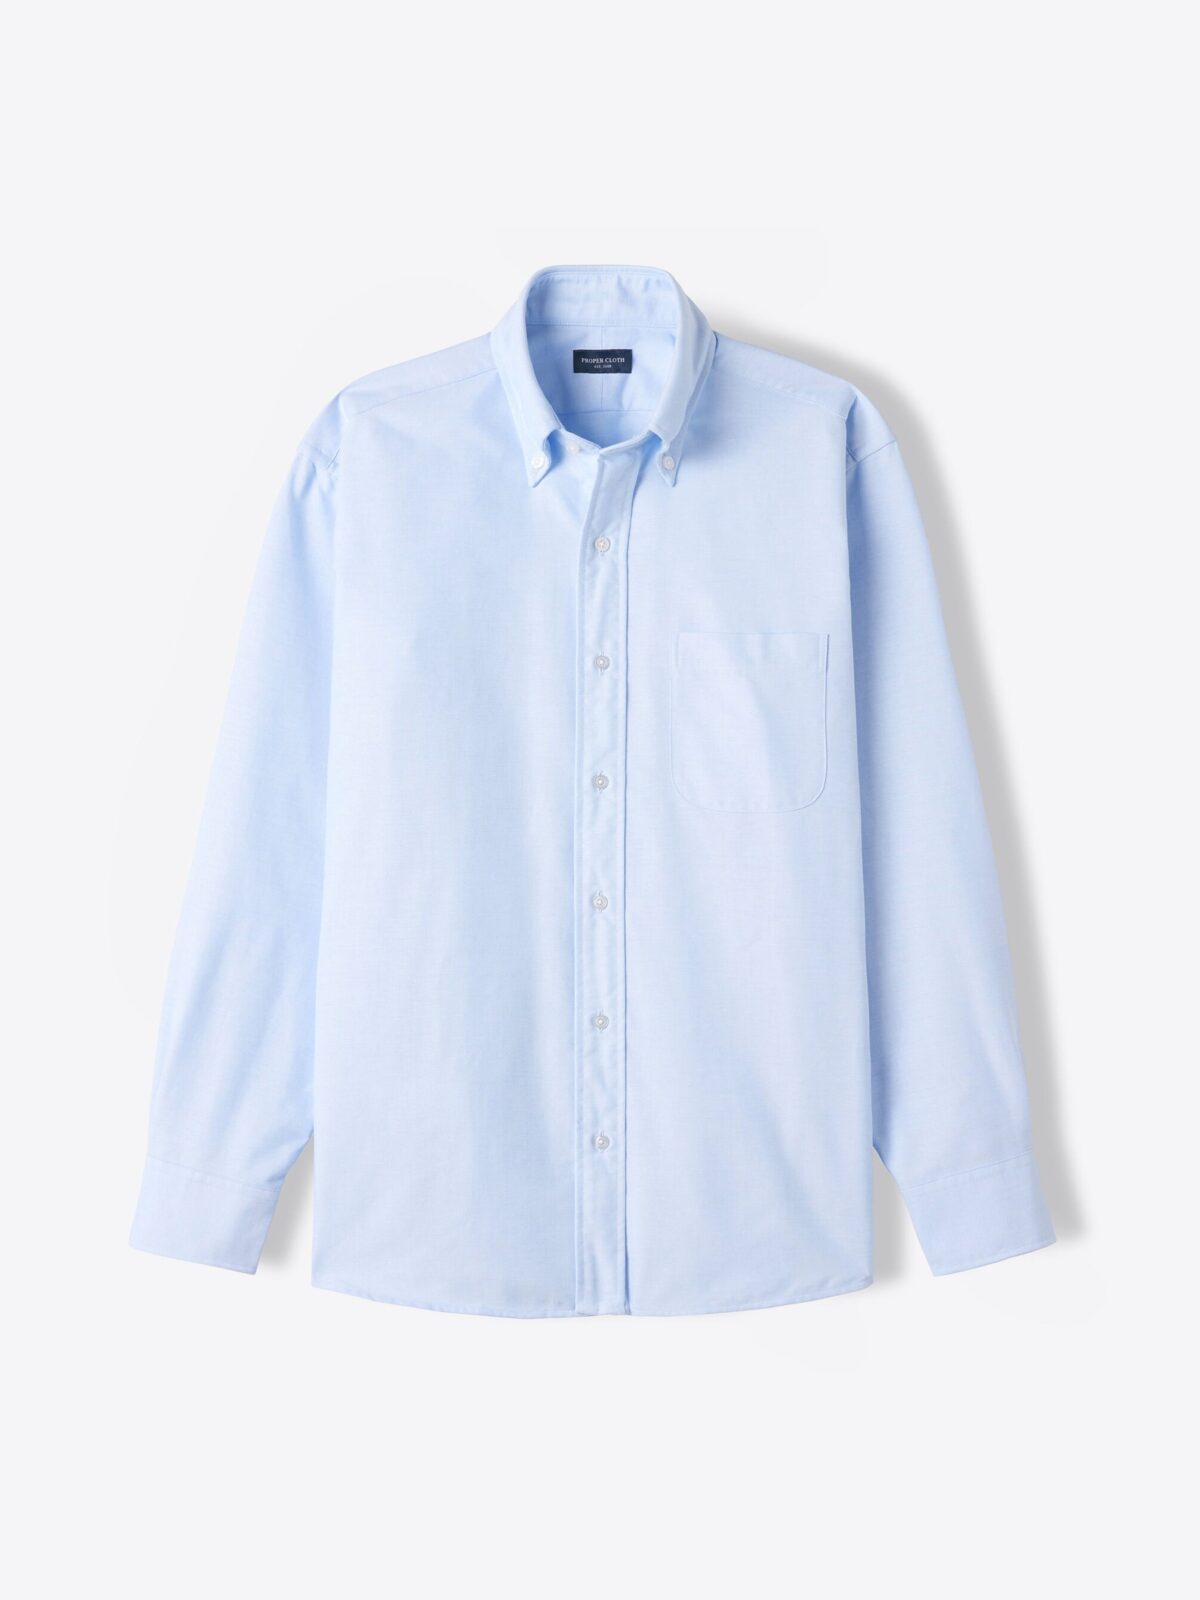 Canclini Light Blue Recycled Cotton Chambray Shirts by Proper Cloth